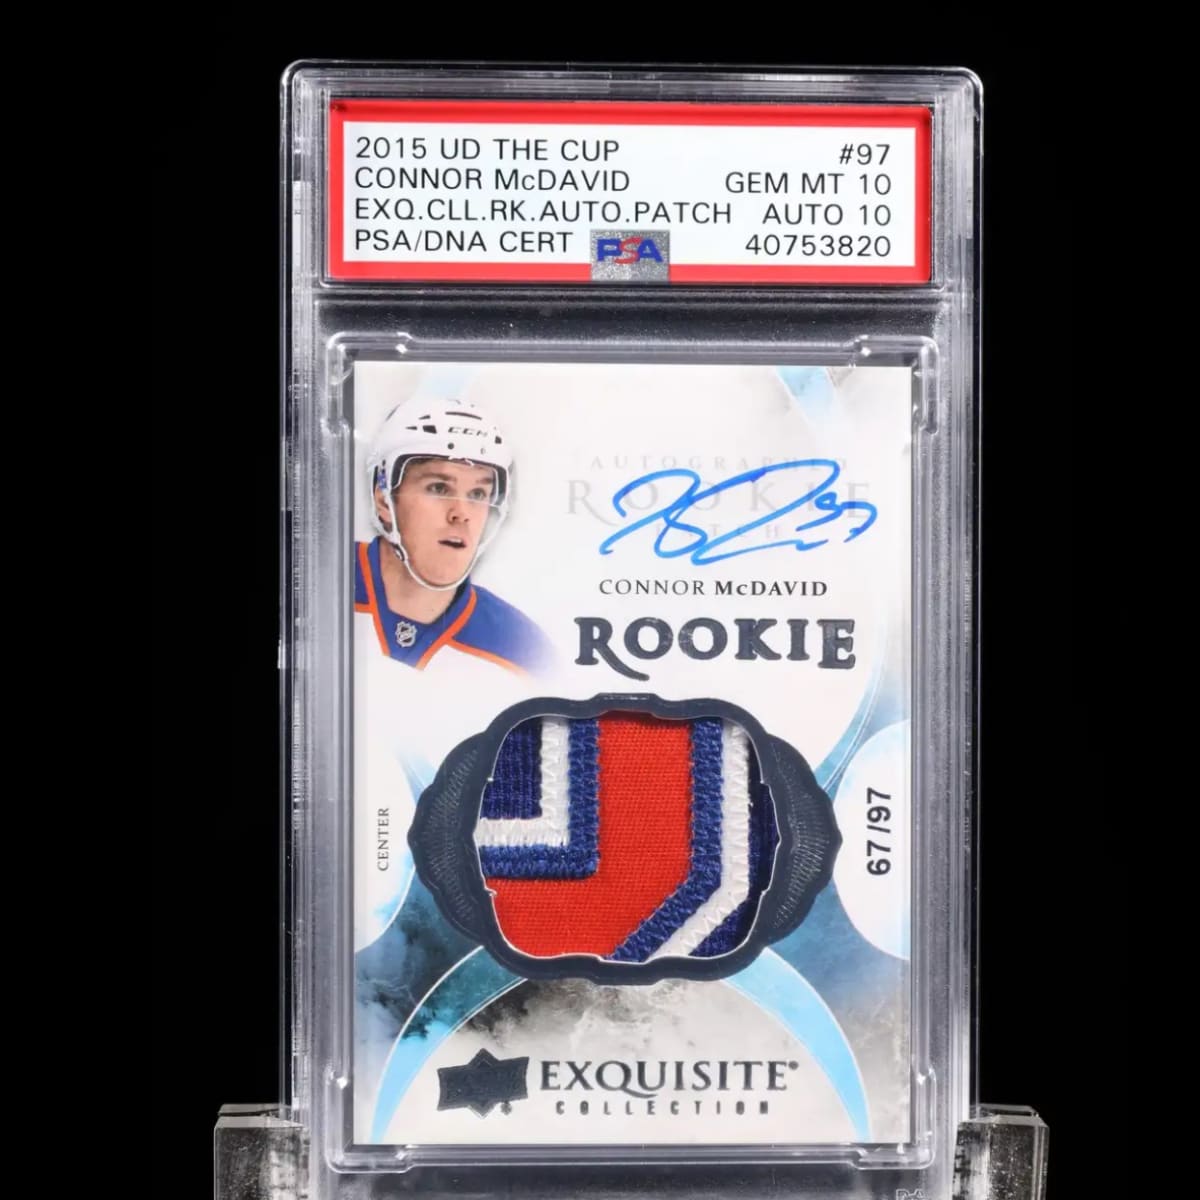 Connor McDavid rookie card sells for record price in online auction, iNFOnews